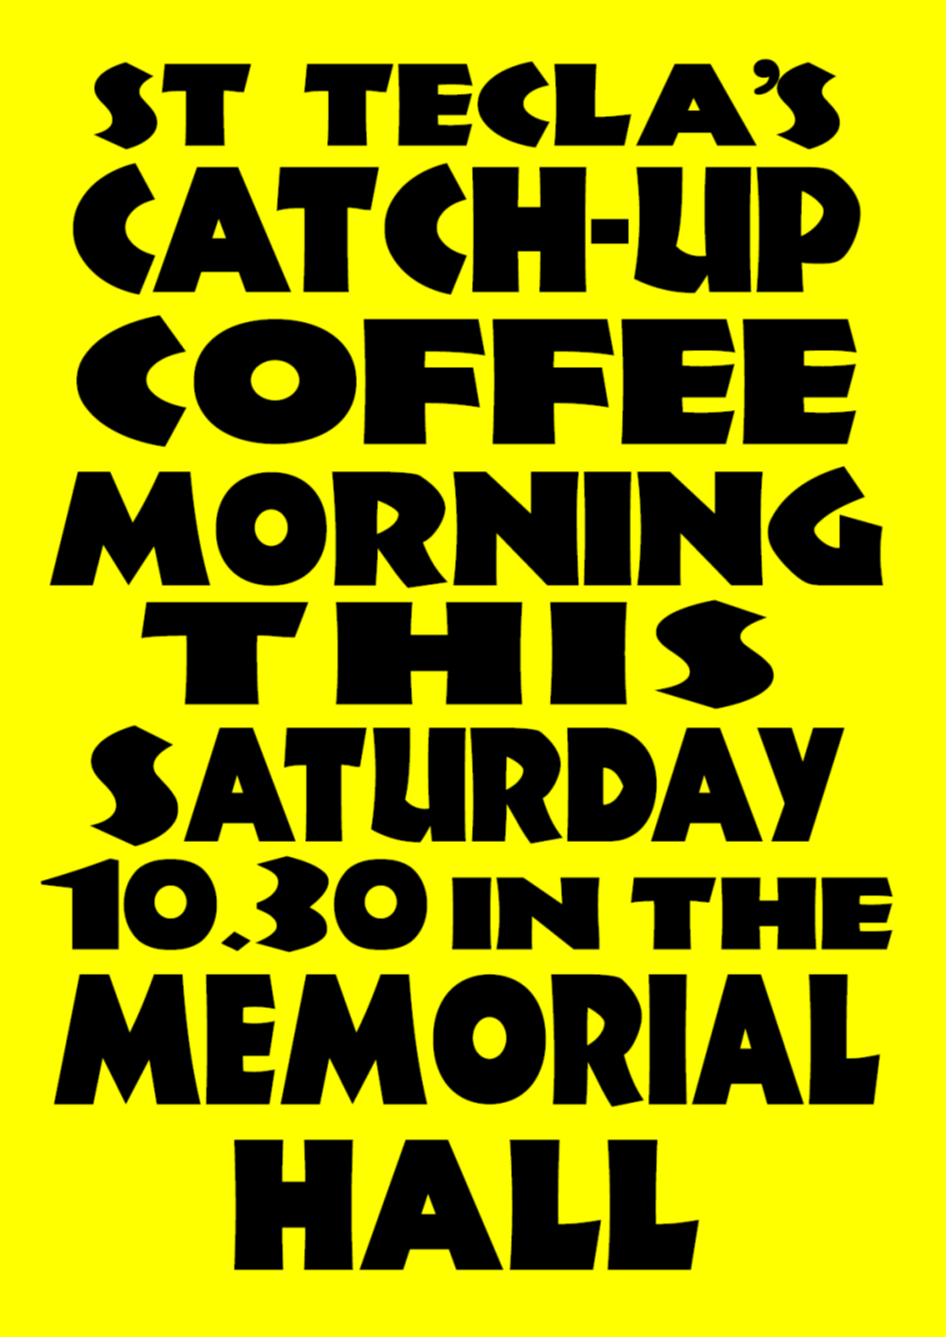 Catch up Coffee Morning